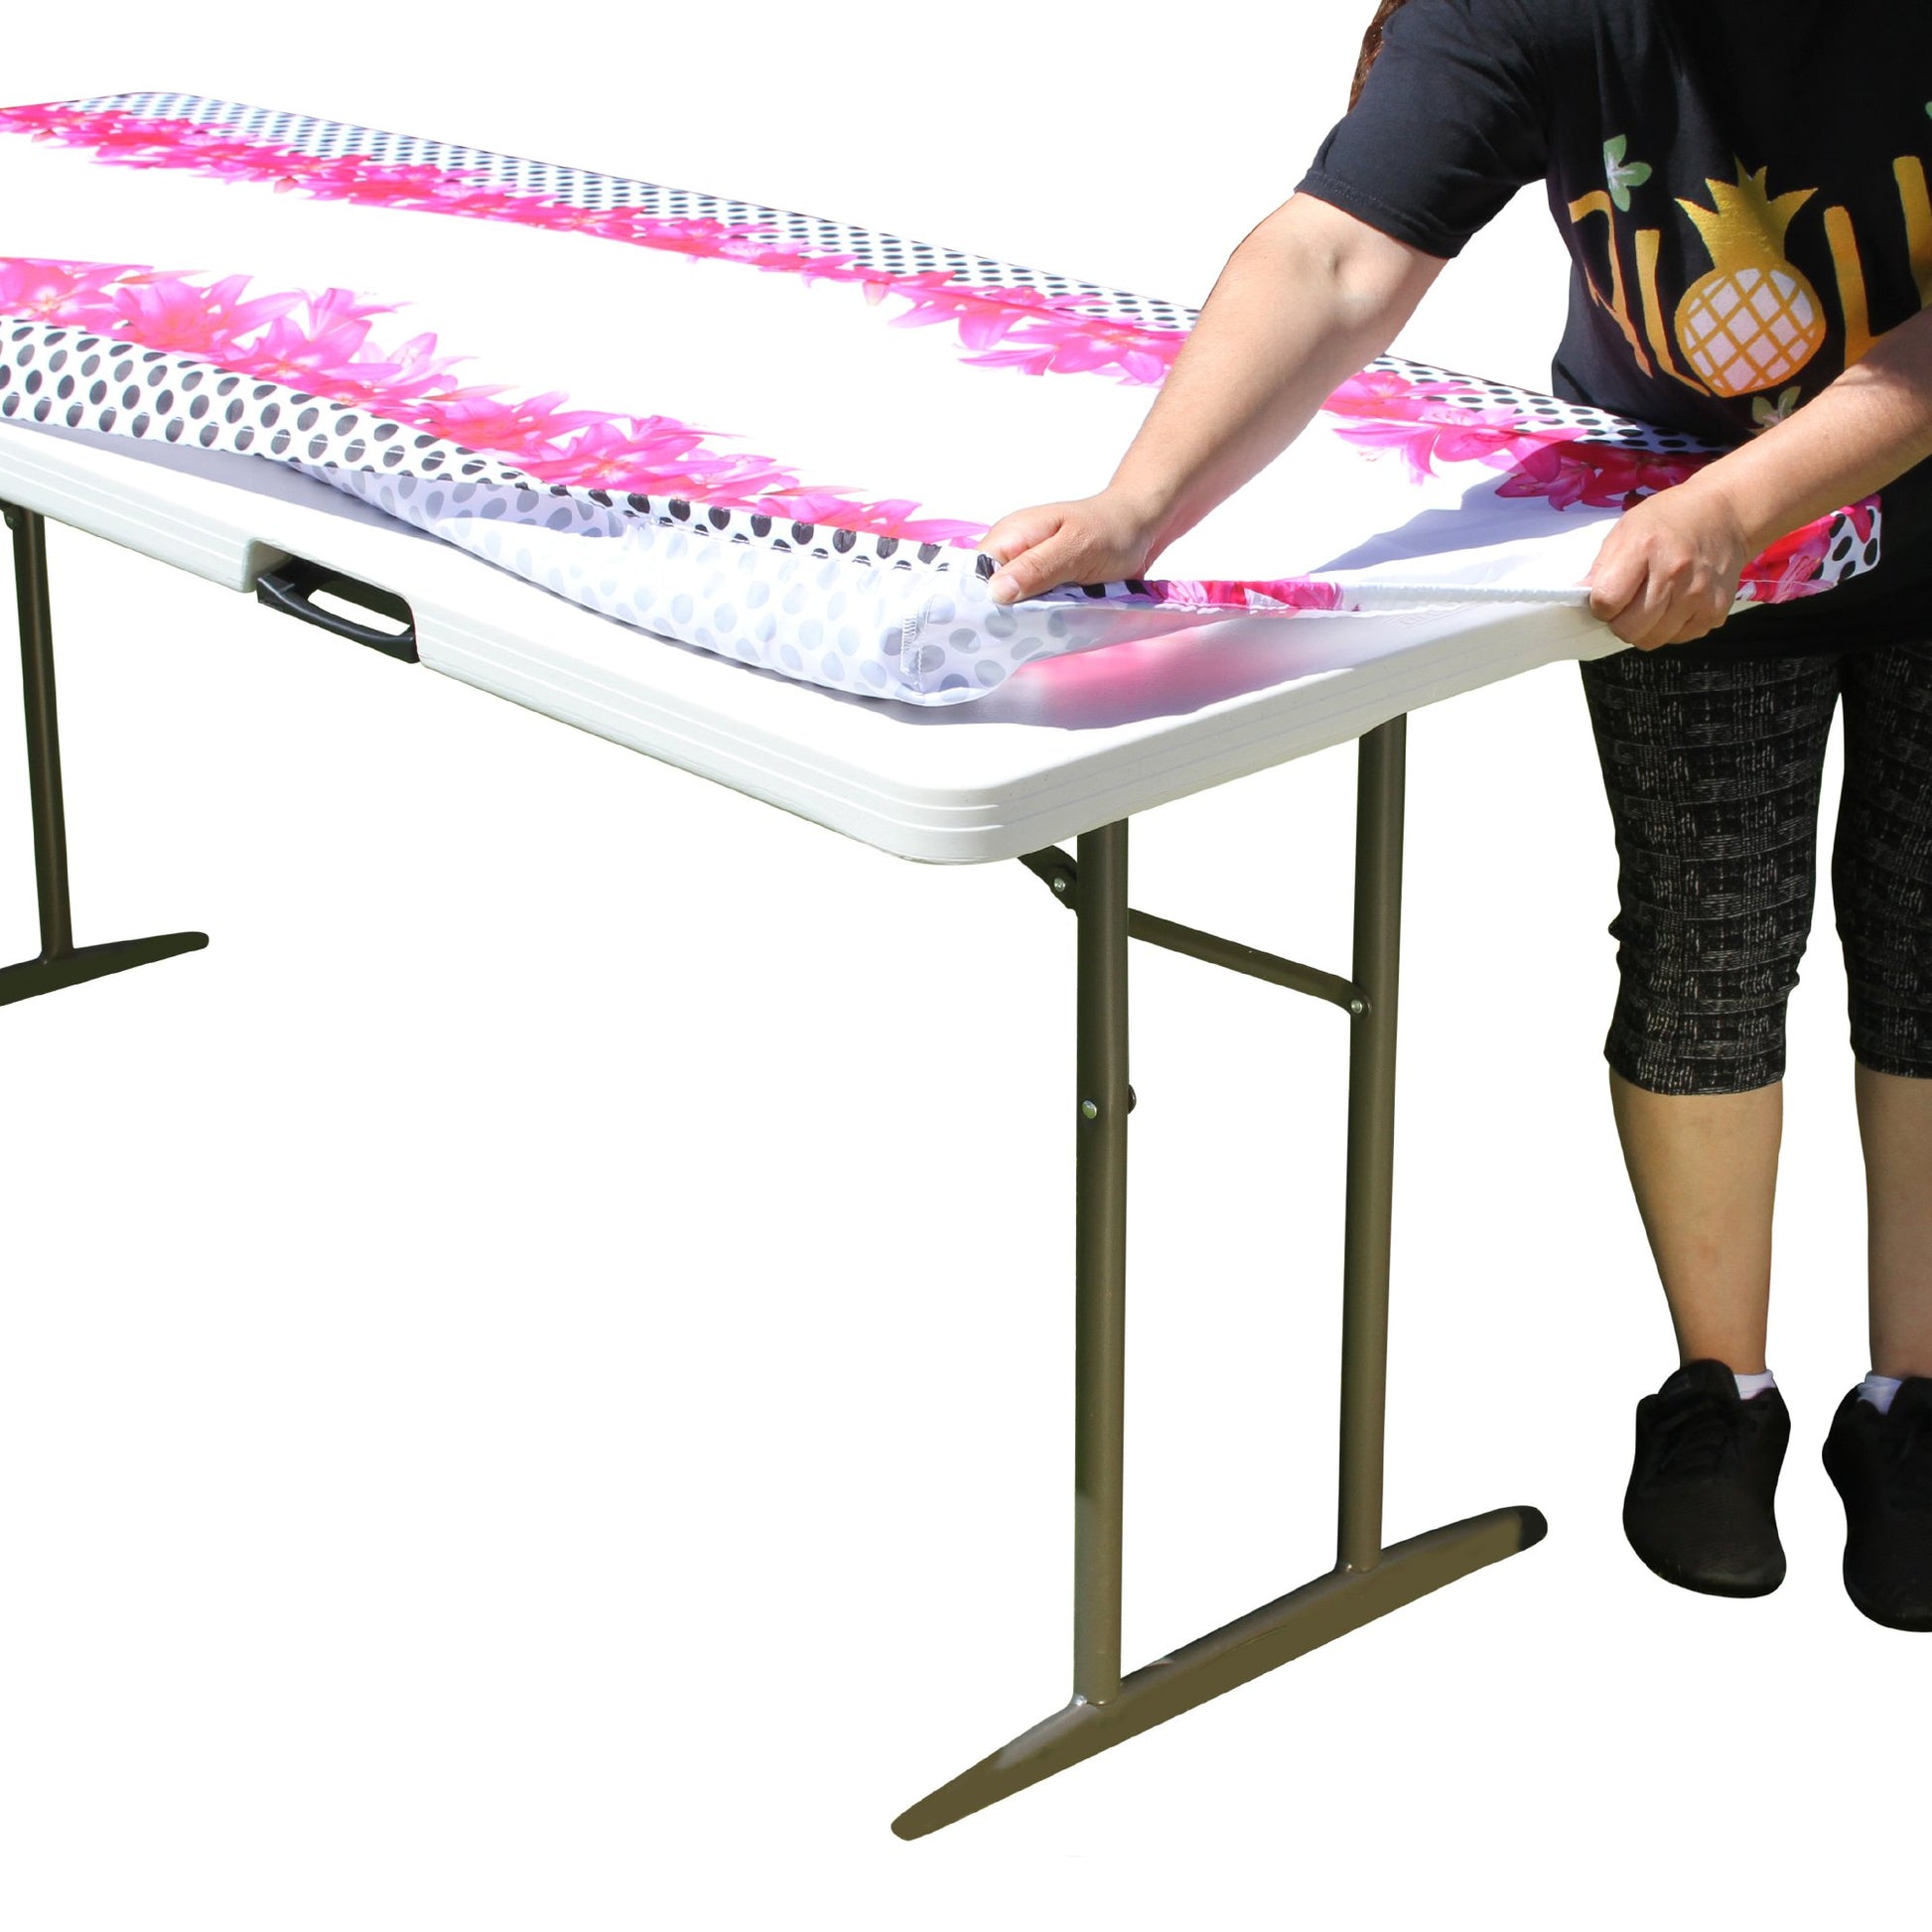 A person stretching TableCloth PLUS 72" Lilies Fitted Polyester Tablecloth for 6' Folding Tables over a folding table